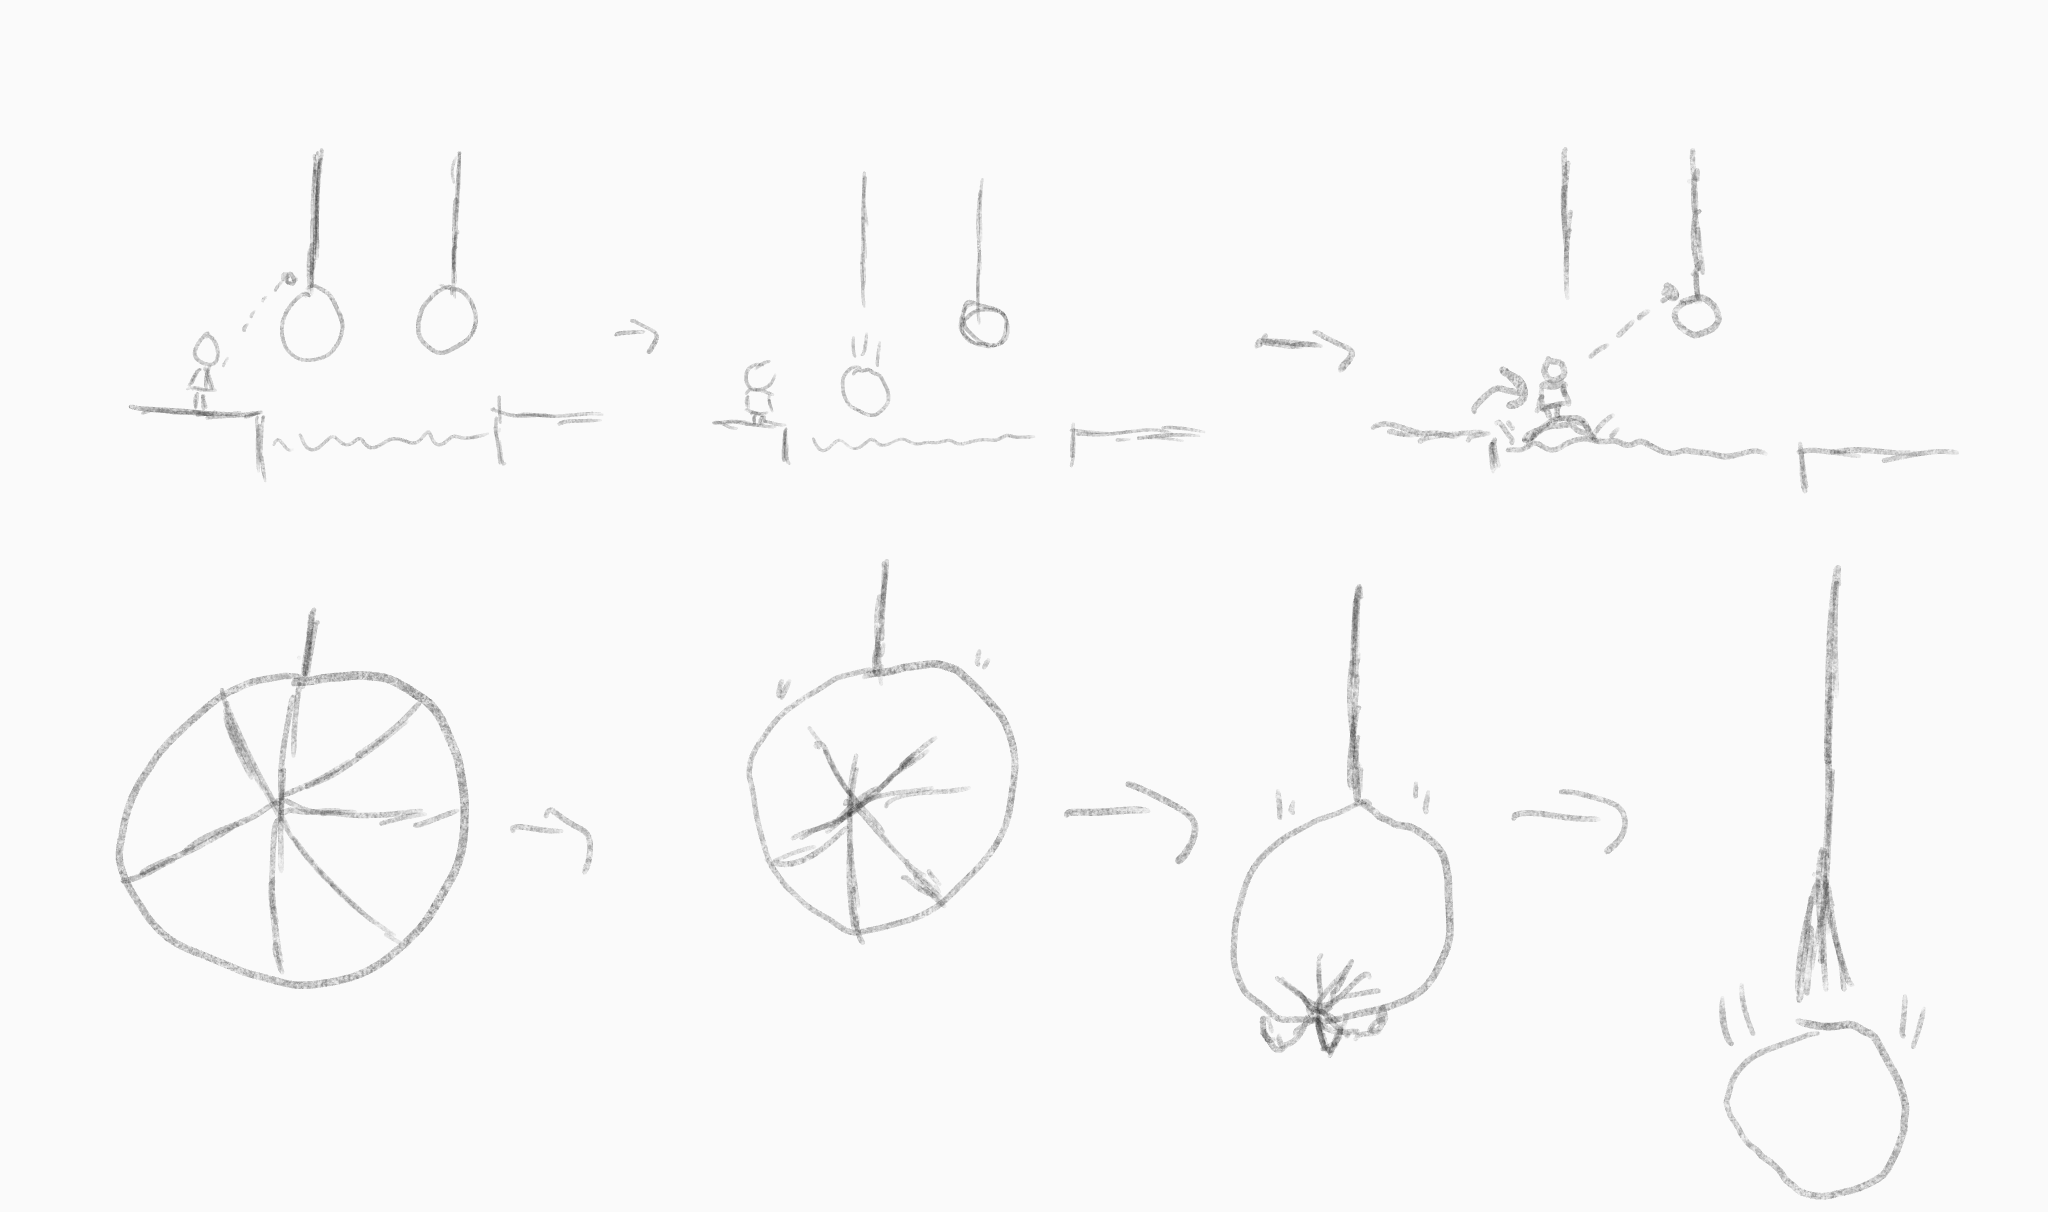 Boulder animation sequence